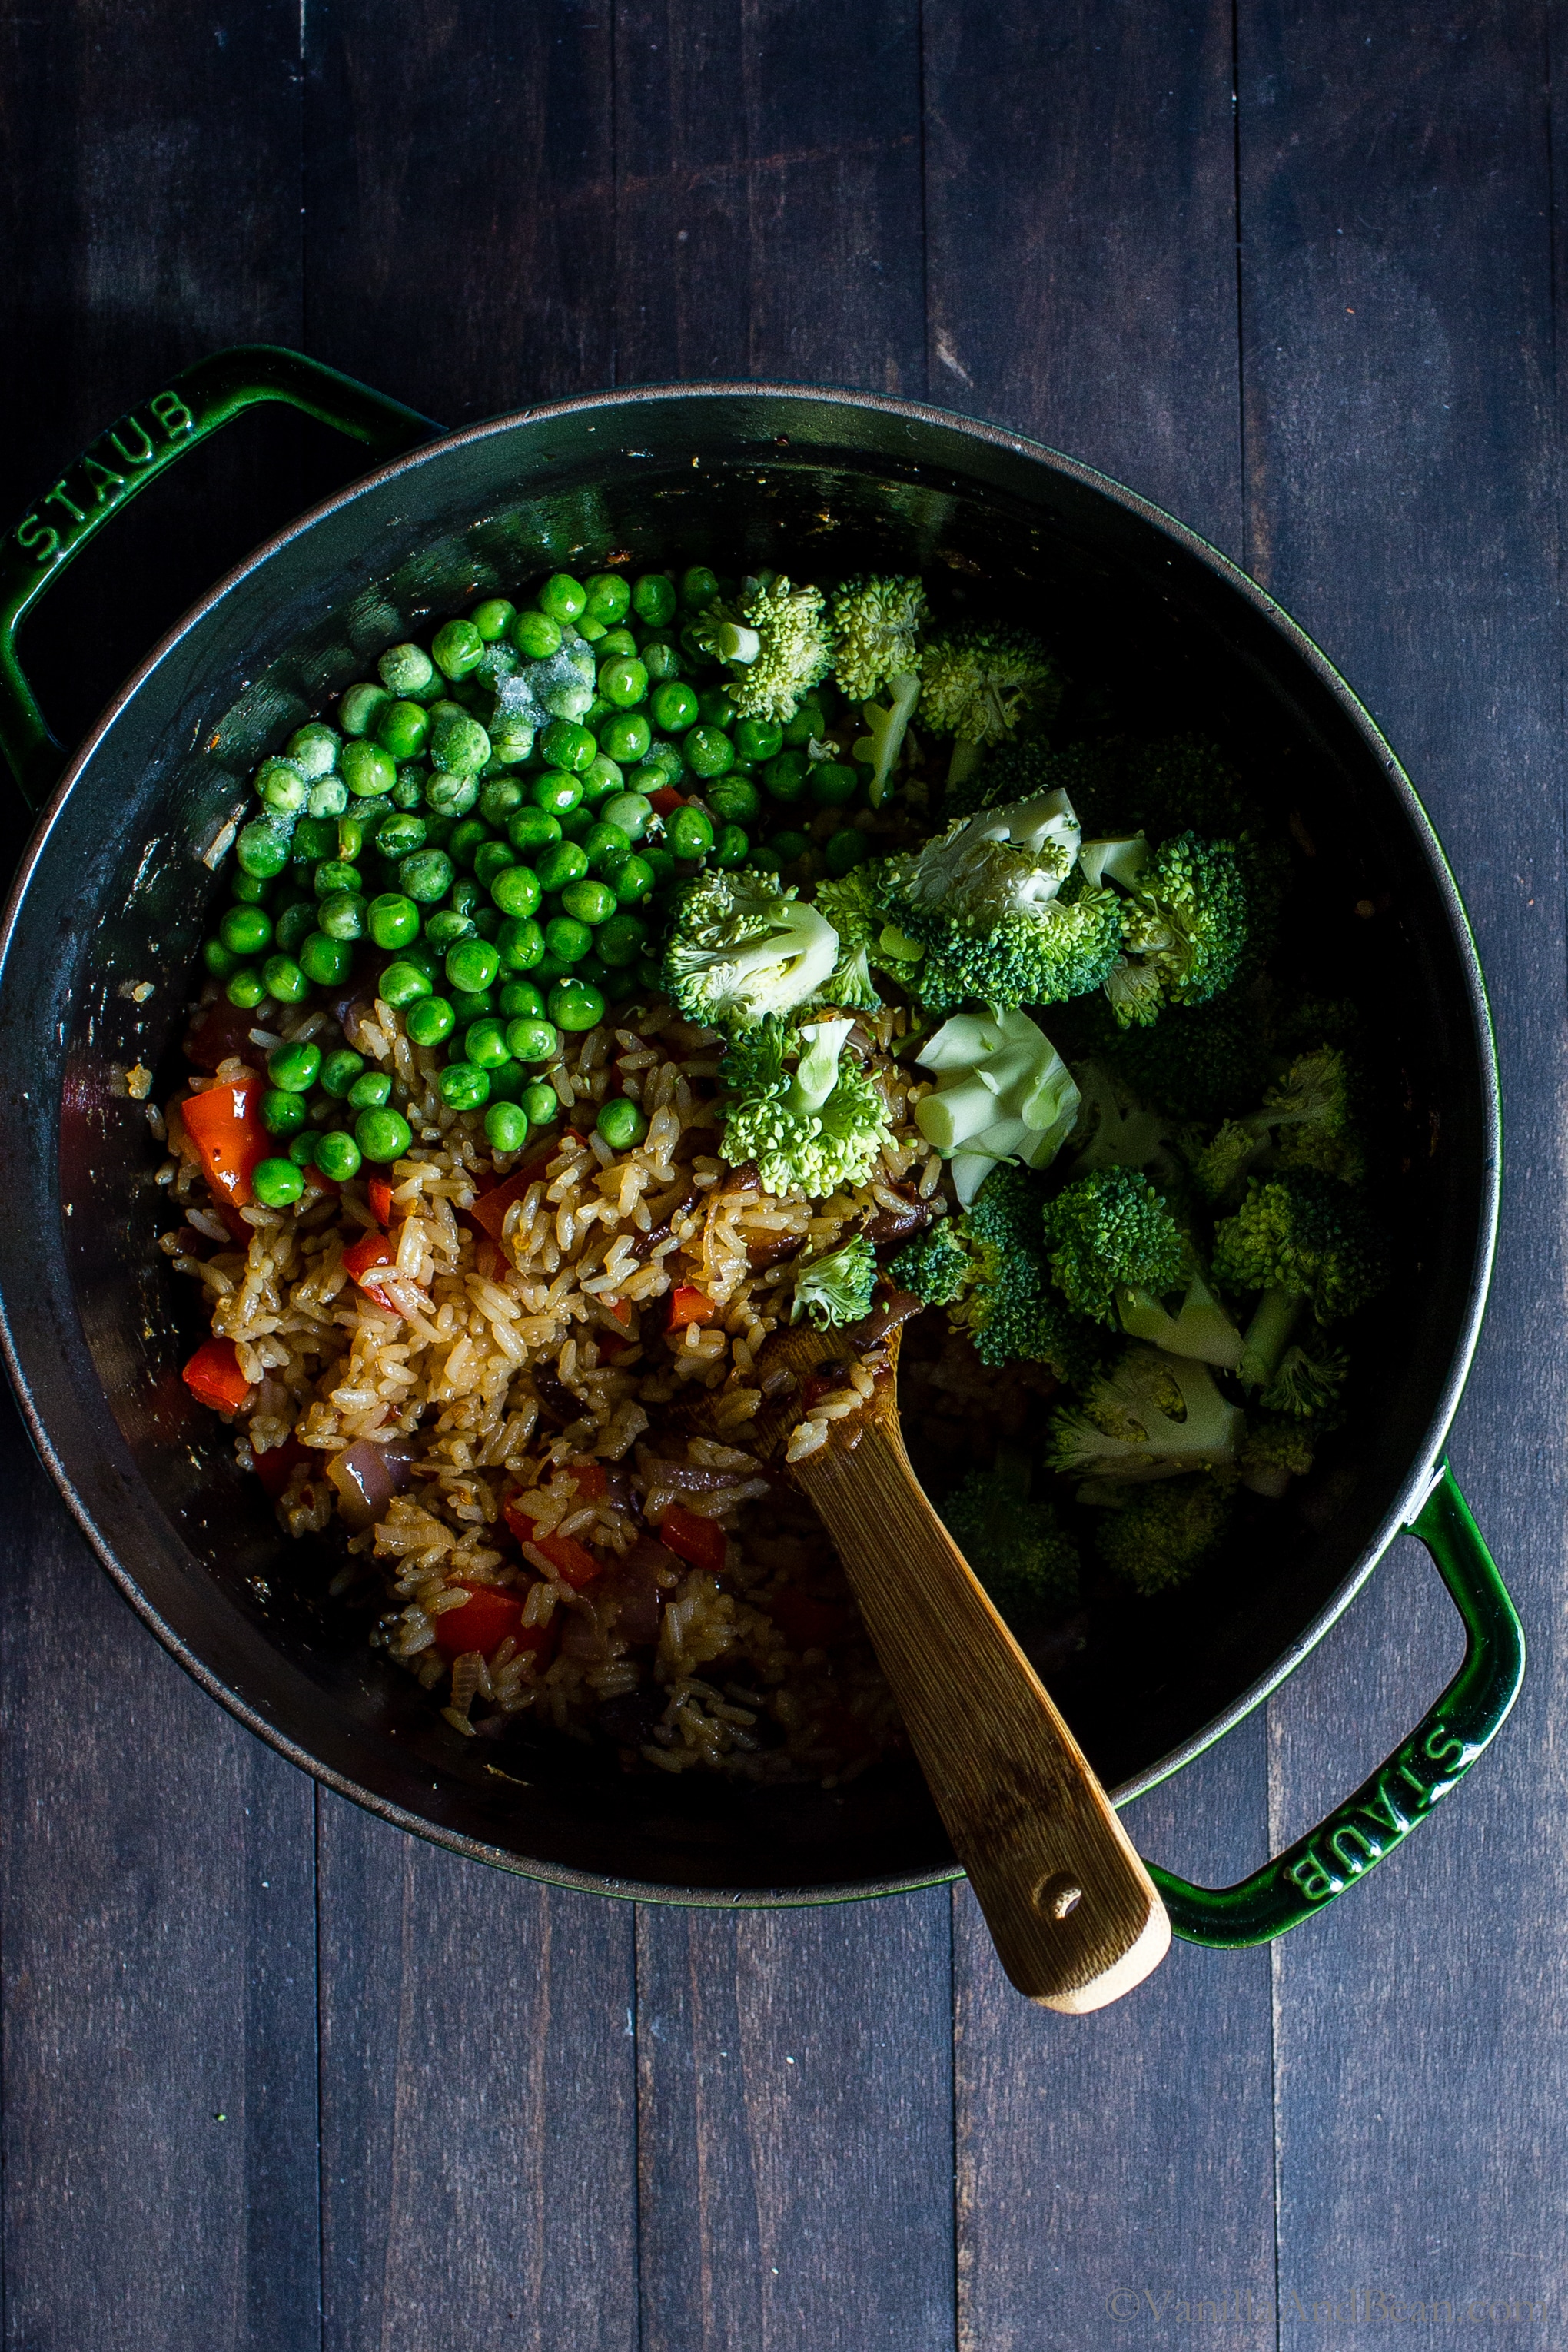 Adding sweet peas and broccoli to the stir fried rice and veggies in a Dutch oven. 